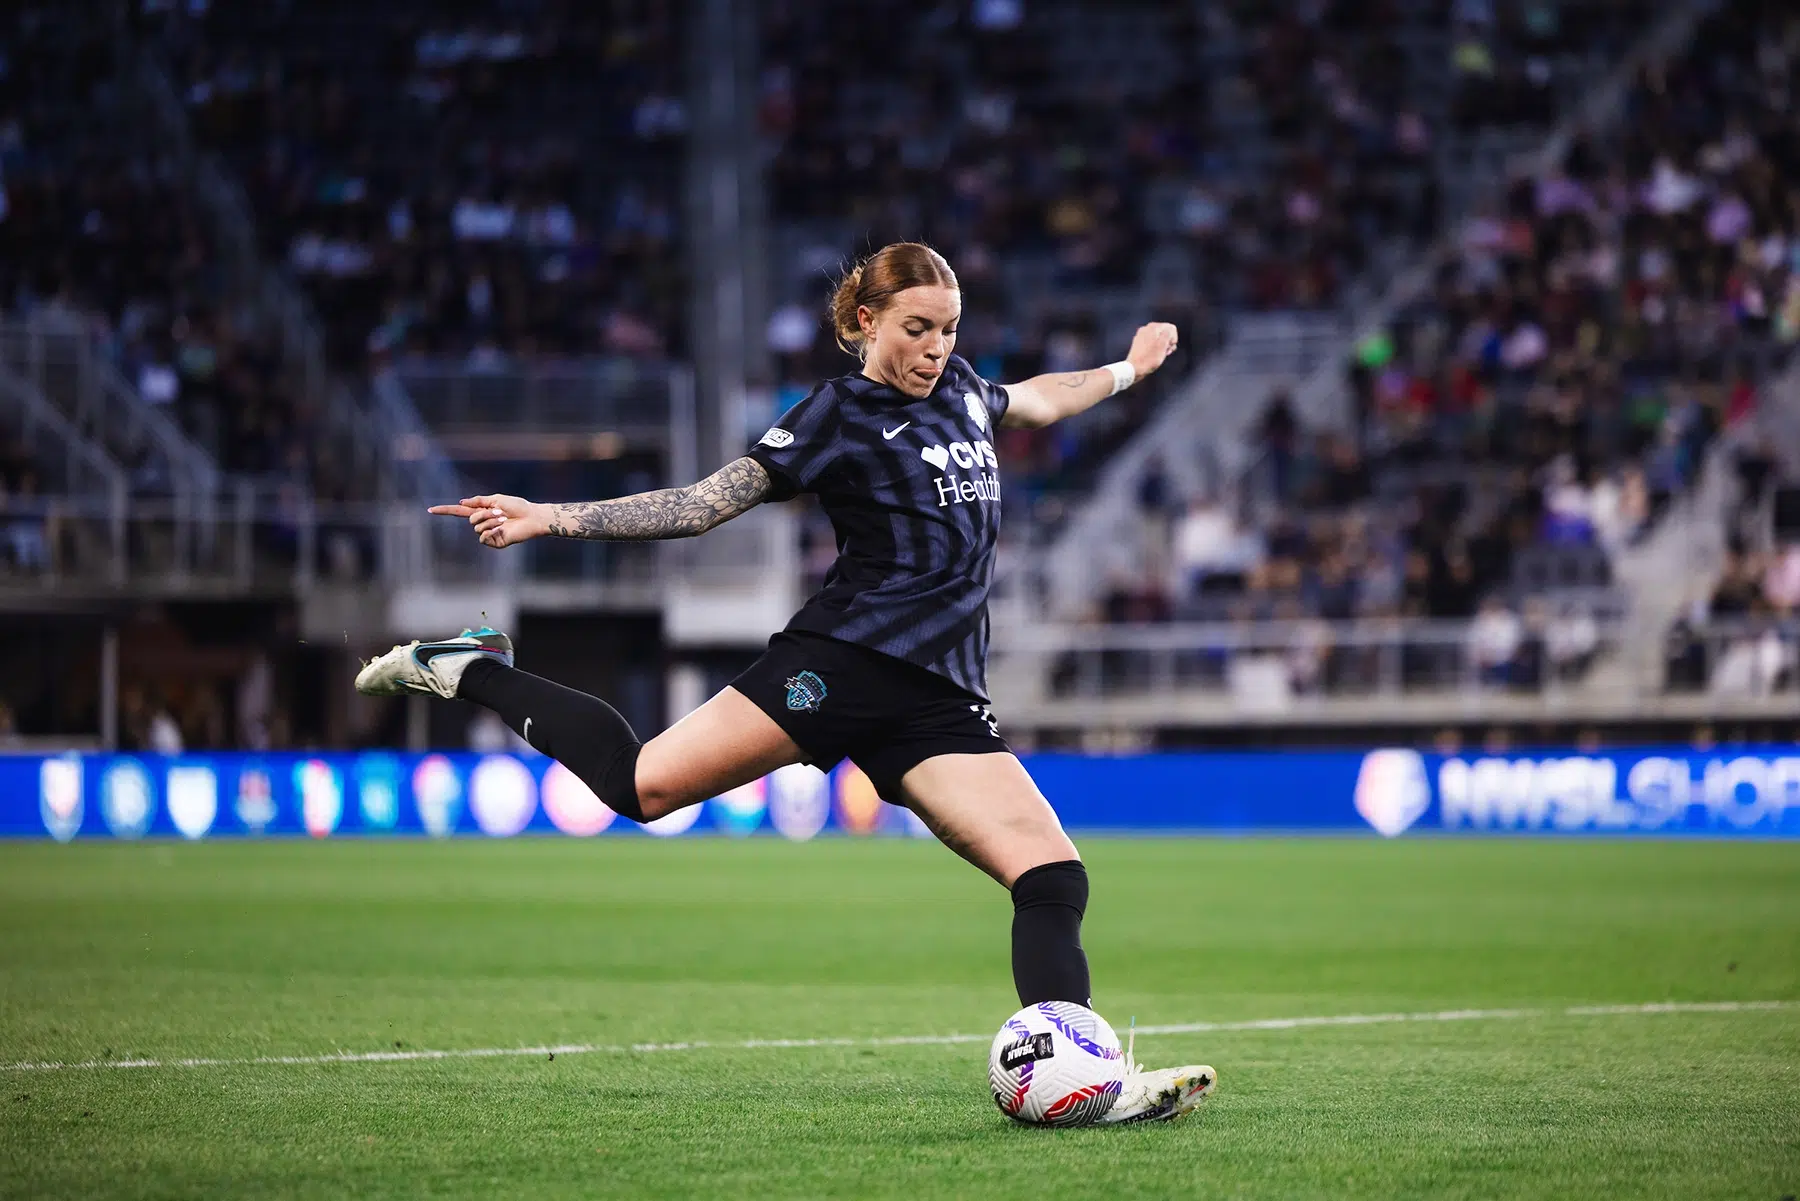 Hal Hershfelt winds up to kick a soccer ball. She is wearing a black Spirit kit with her red hair in a low bun.